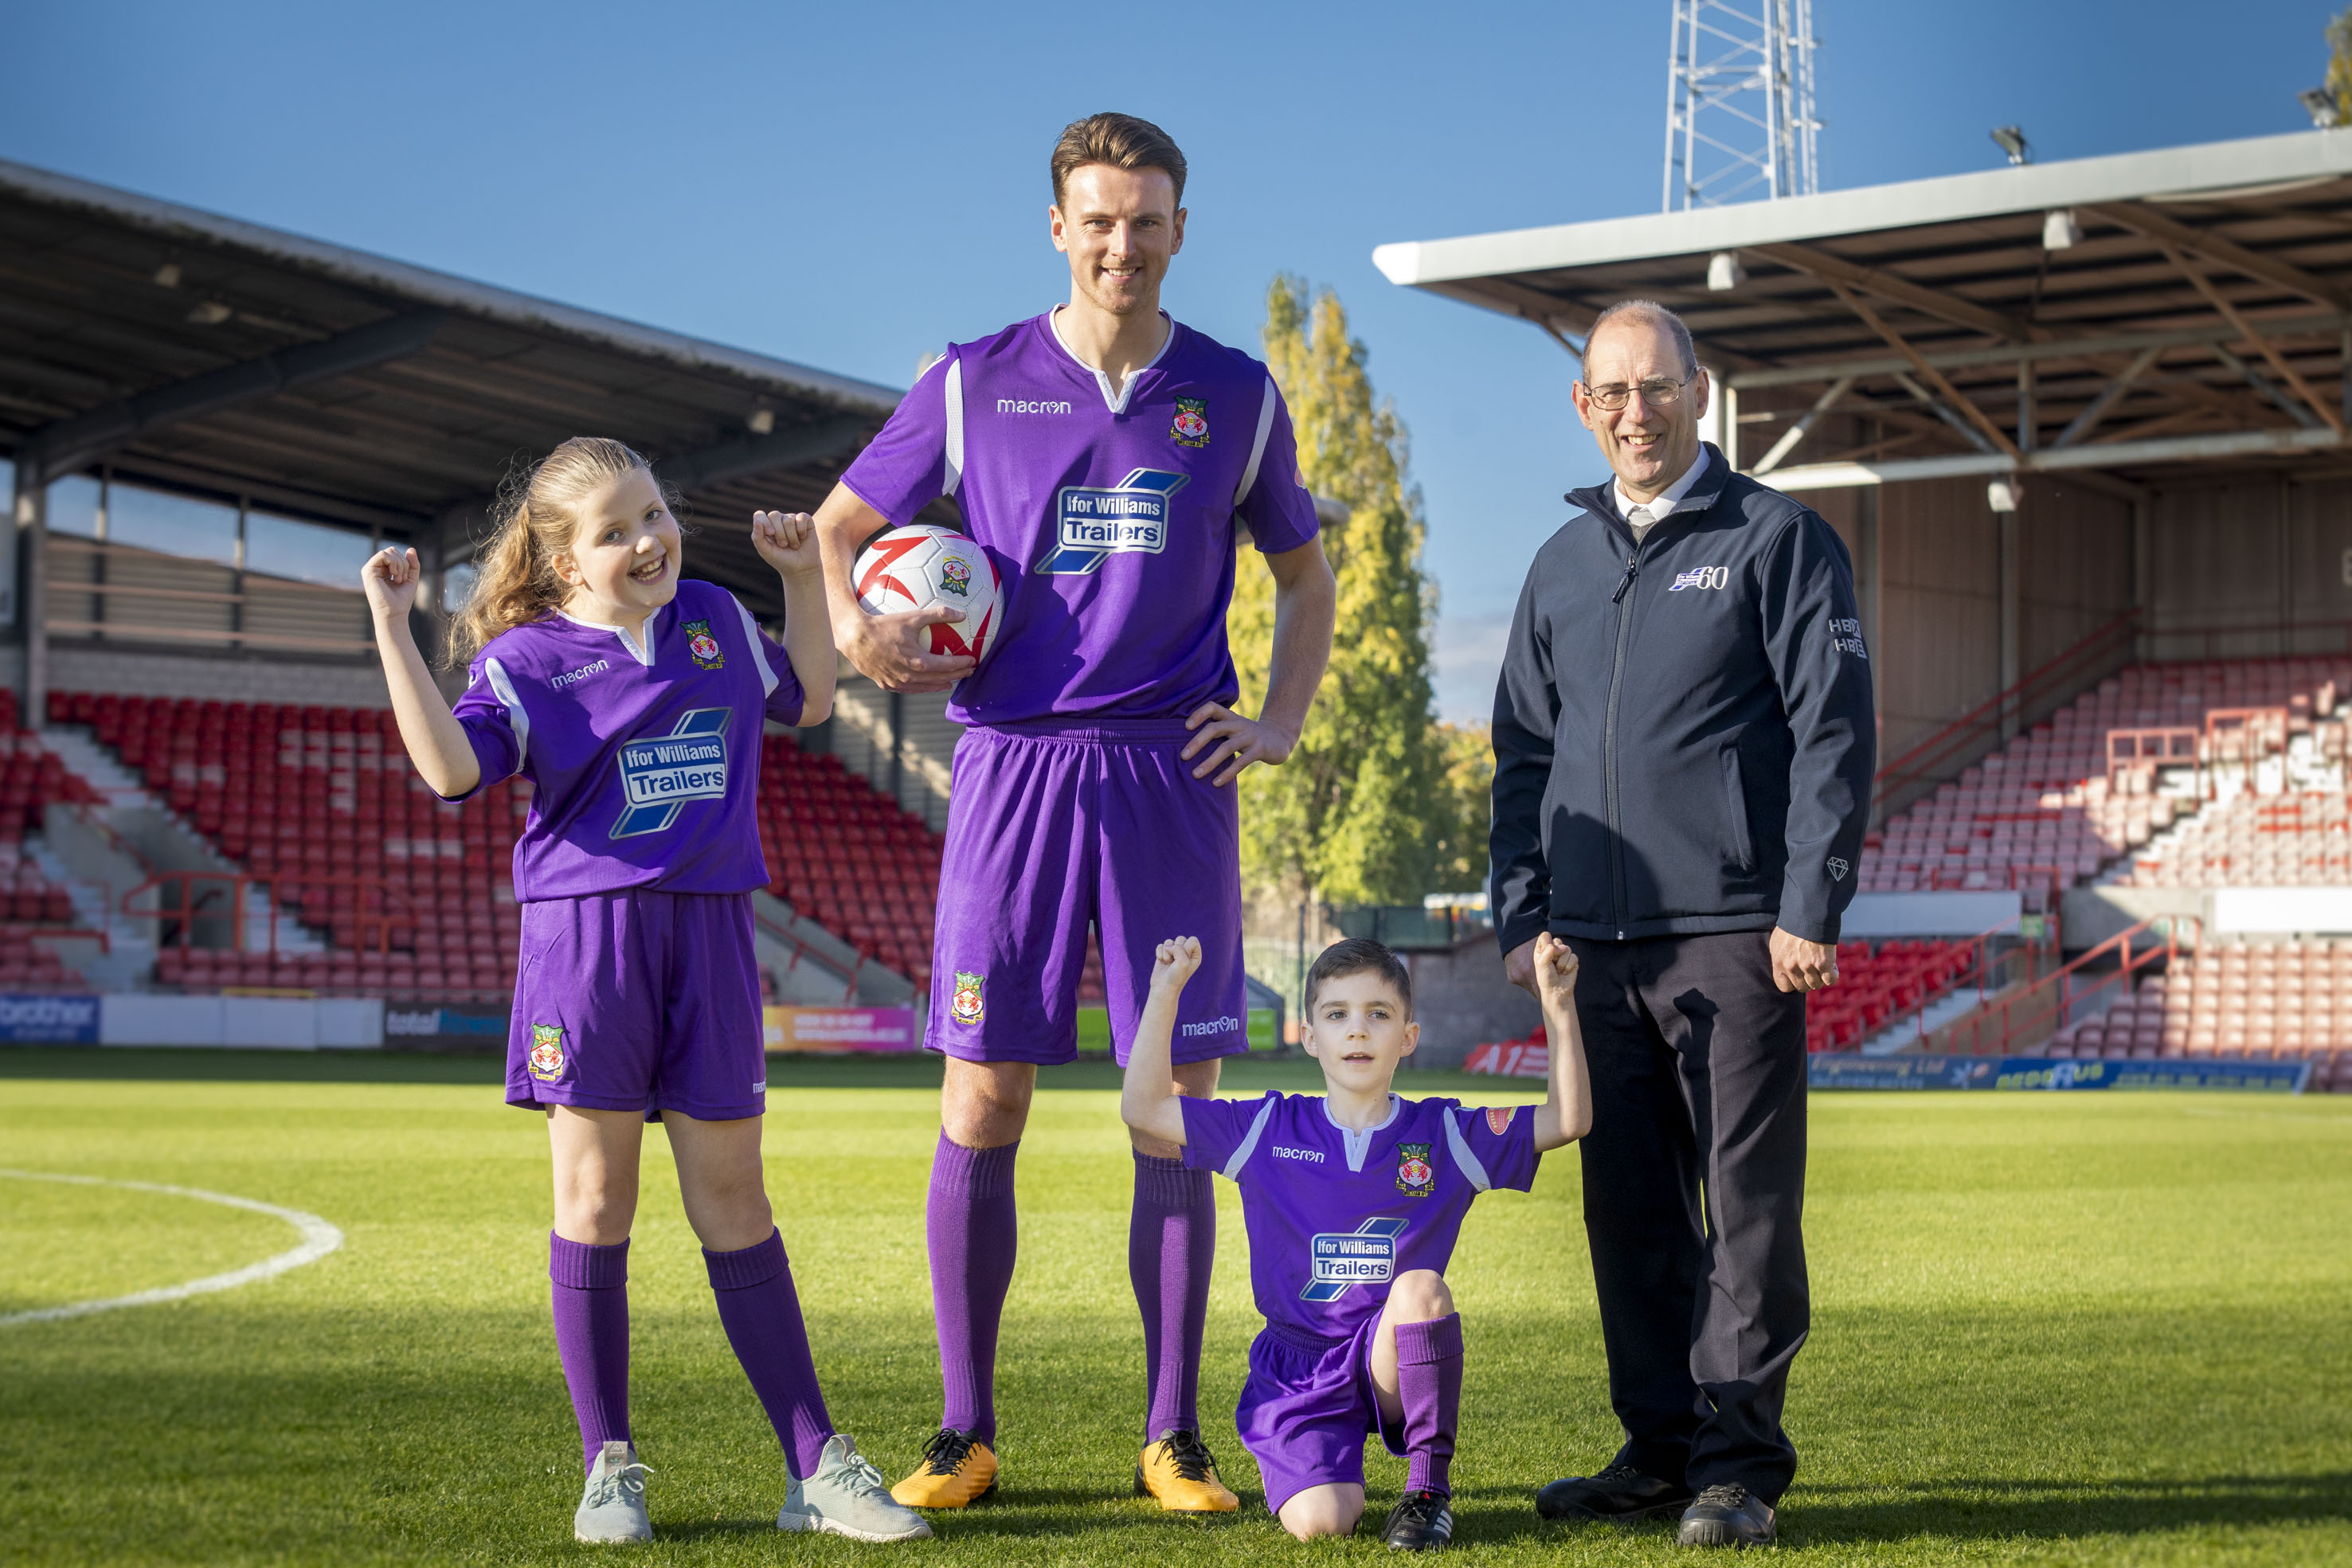 Wrexham fan Russell hopes for purple patch in form with new kit